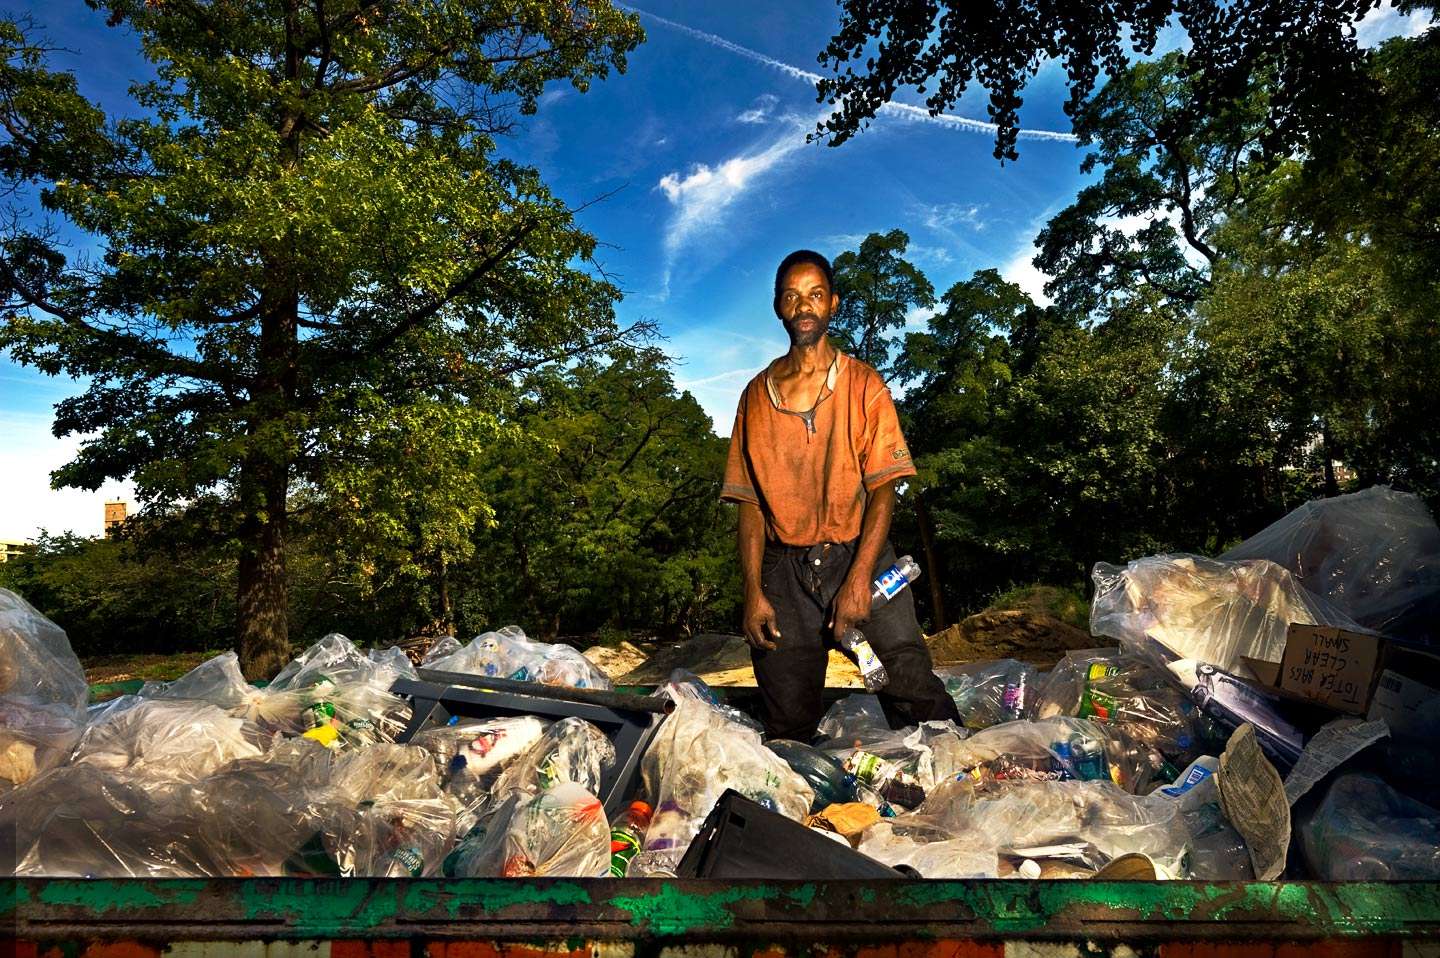 Ernest Phillips earning money in America by collecting bottles from the trash in Central Park, NYC : On The Road : New York City based photographer and video specializing in portrait corporate portraits, video, editorial stories for on location and architectural photography